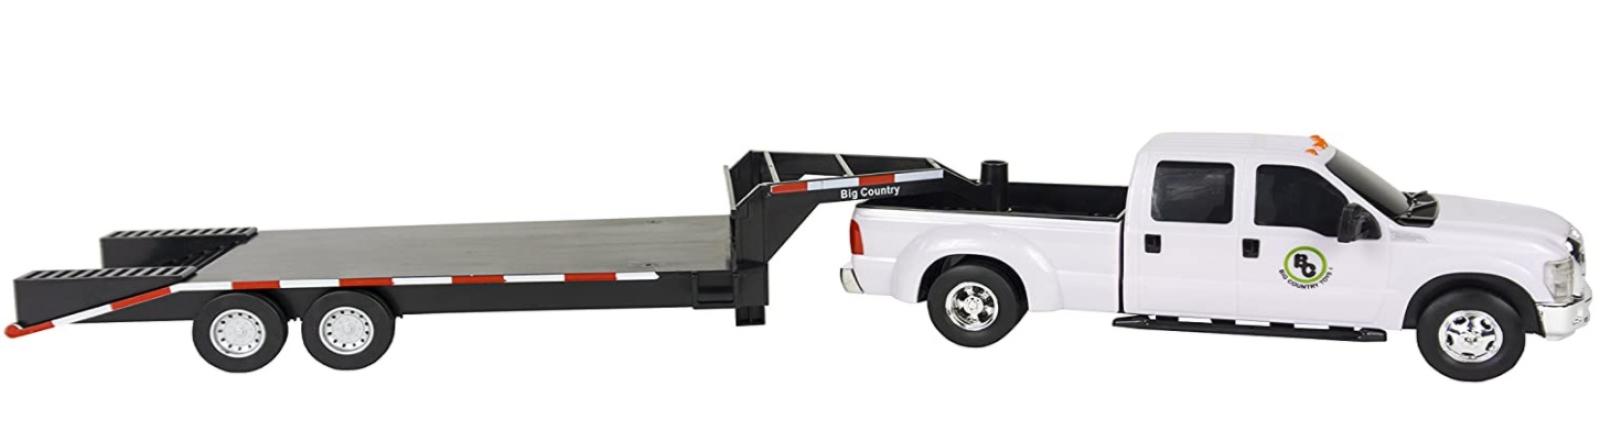 Big Country Farm Toys Flatbed Gooseneck Trailer With Truck Not Included